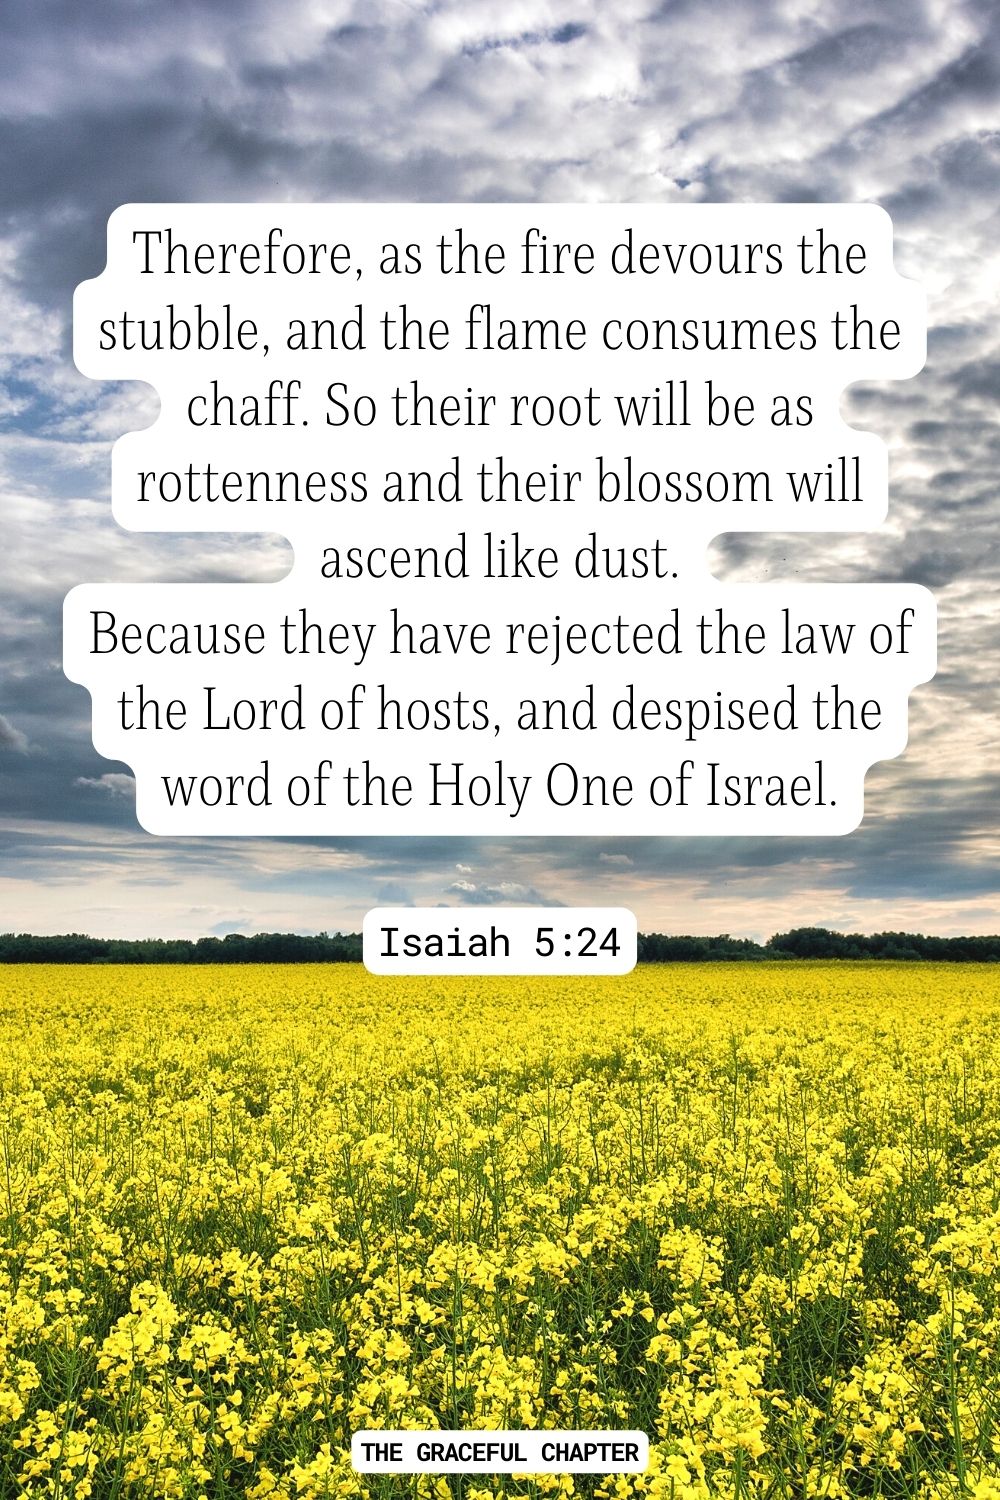 Therefore, as the fire devours the stubble, and the flame consumes the chaff. So their root will be as rottenness and their blossom will ascend like dust. Because they have rejected the law of the Lord of hosts, and despised the word of the Holy One of Israel. Isaiah 5:24